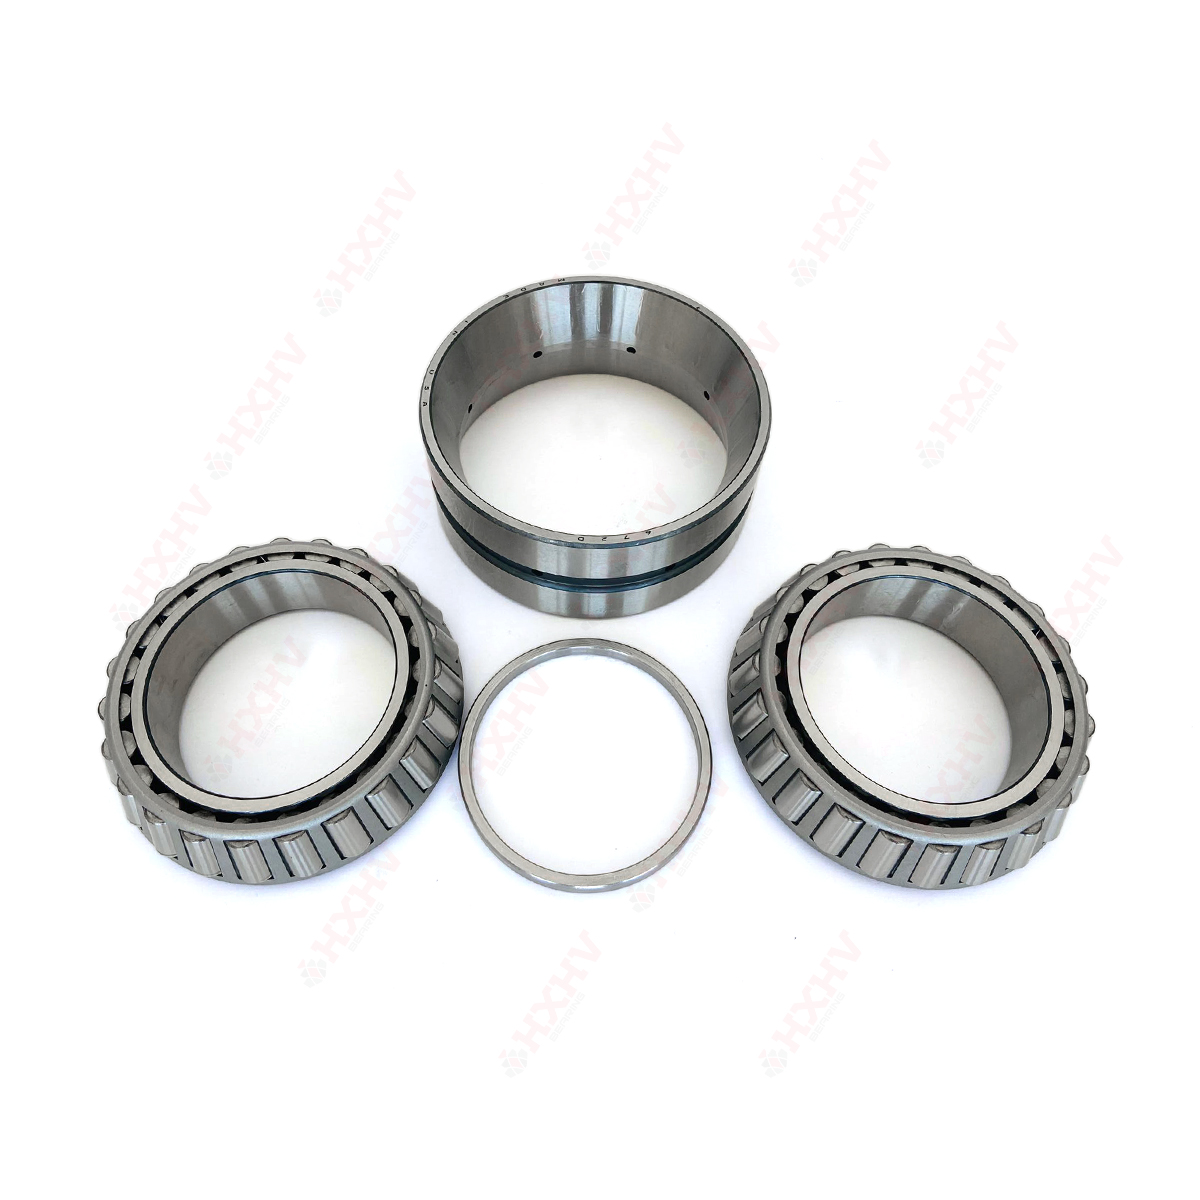 New Fashion Design for 51109 Bearing - 687-672d original timken tapered roller bearing with size 101.6×168.28×92.08 mm – HXHV